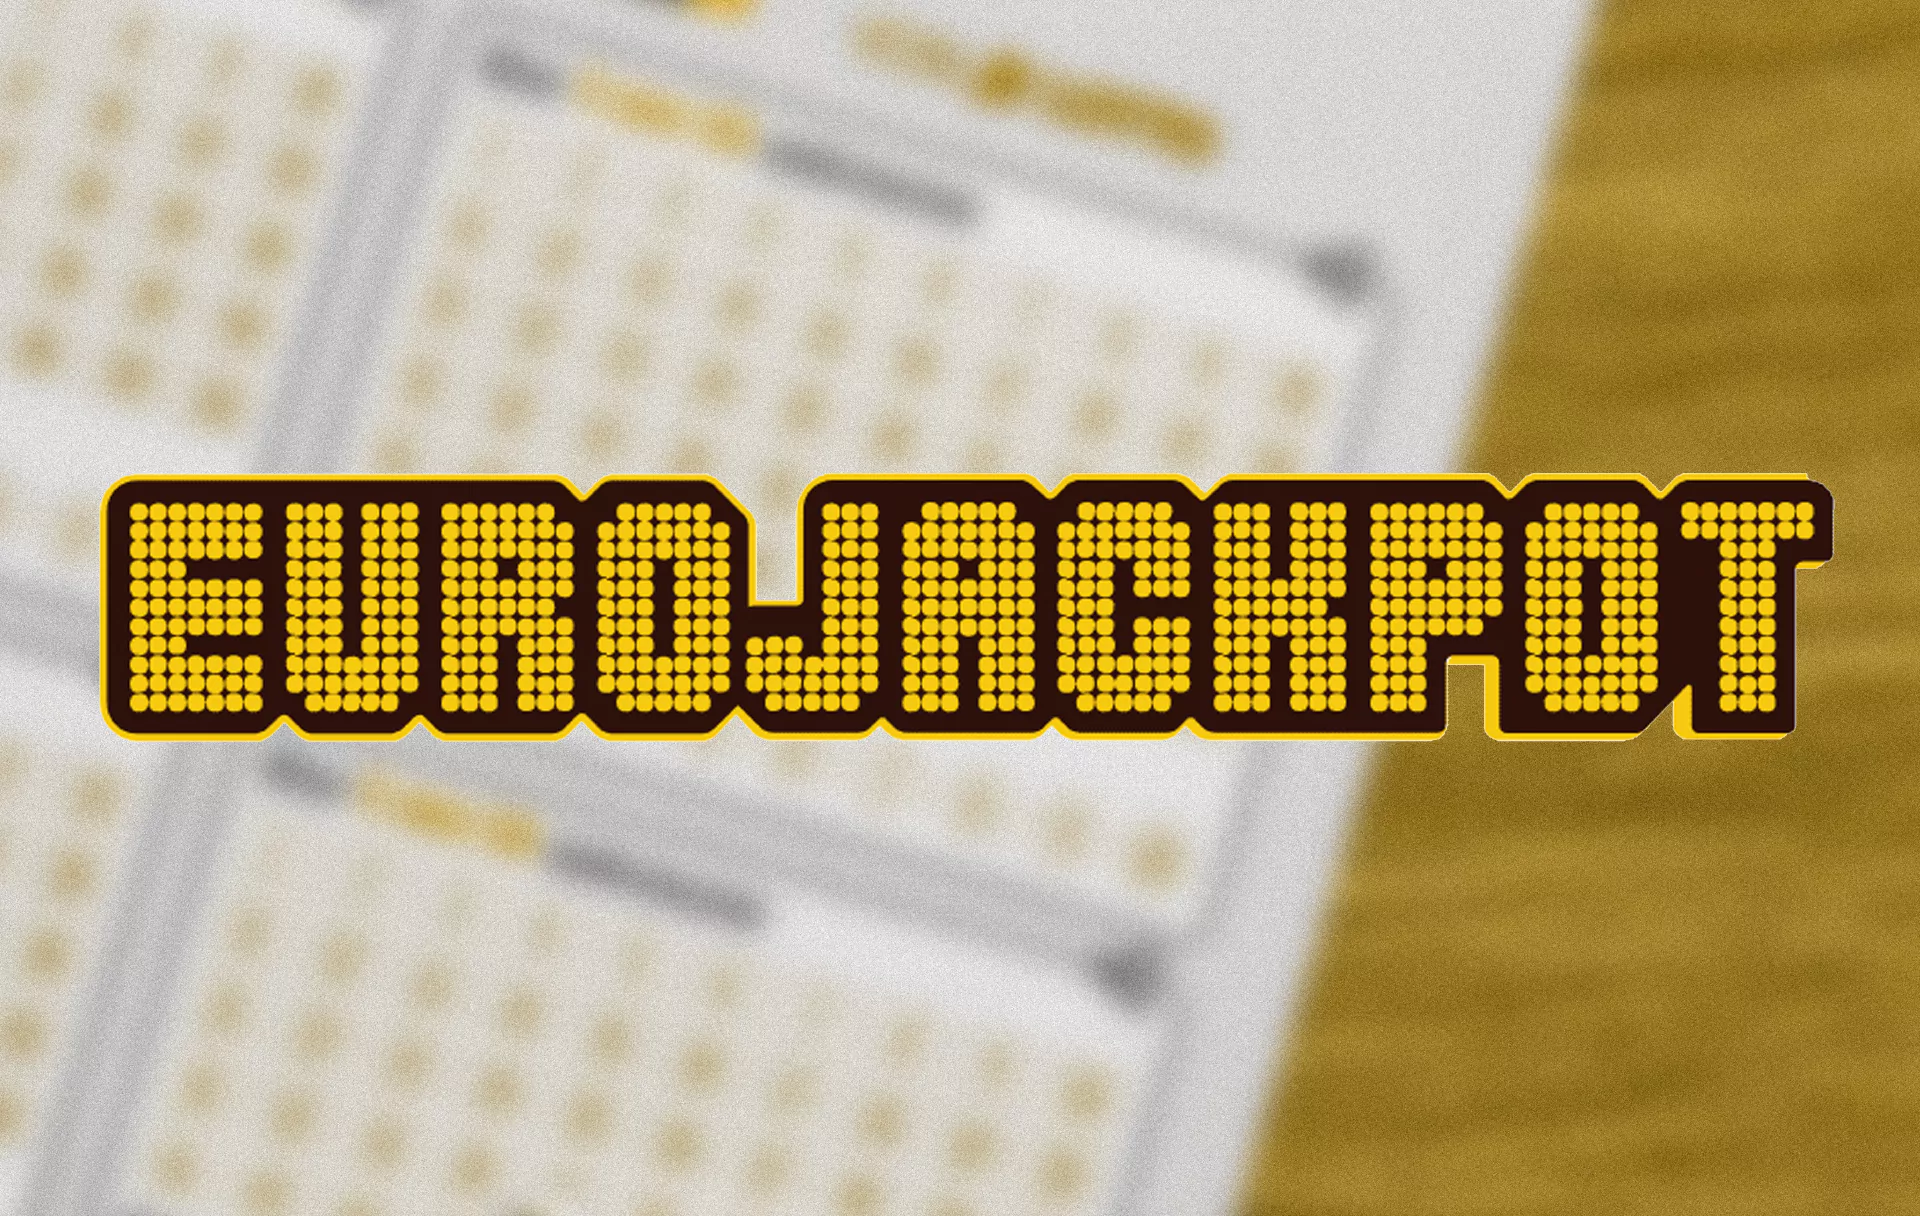 The EuroJackpot online lottery is drawn every Thursday.